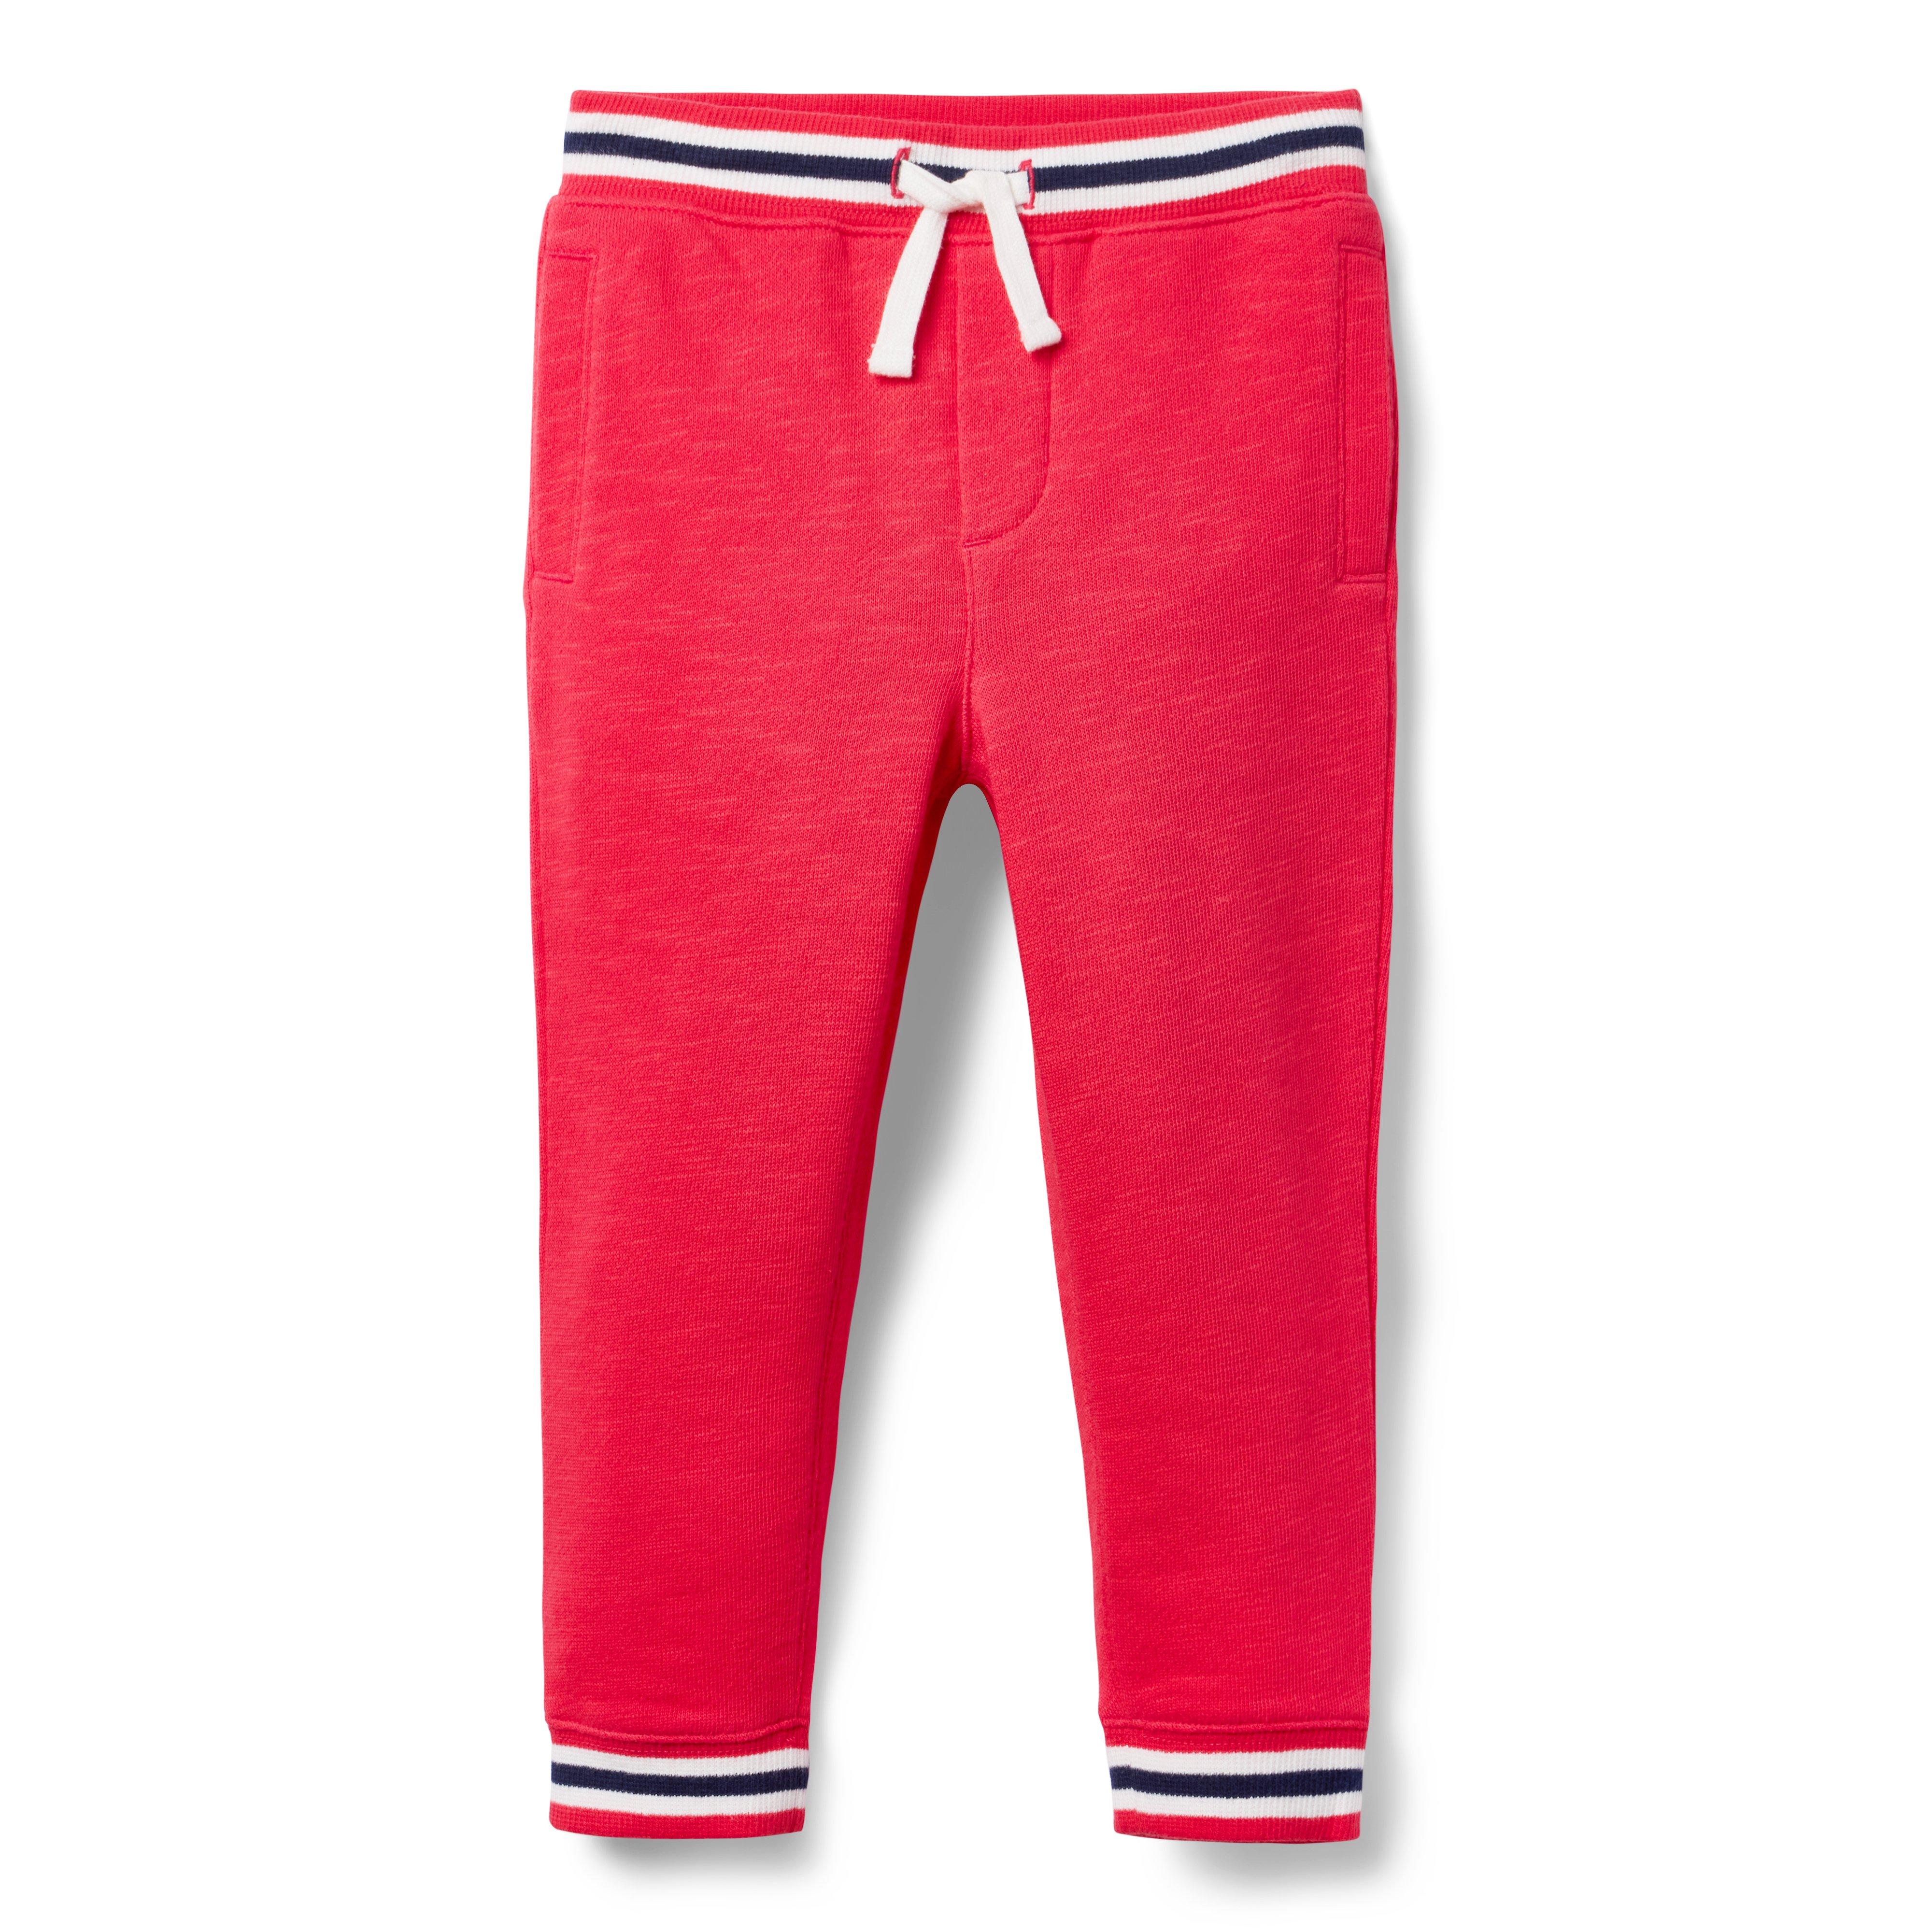 The Stripe French Terry Jogger